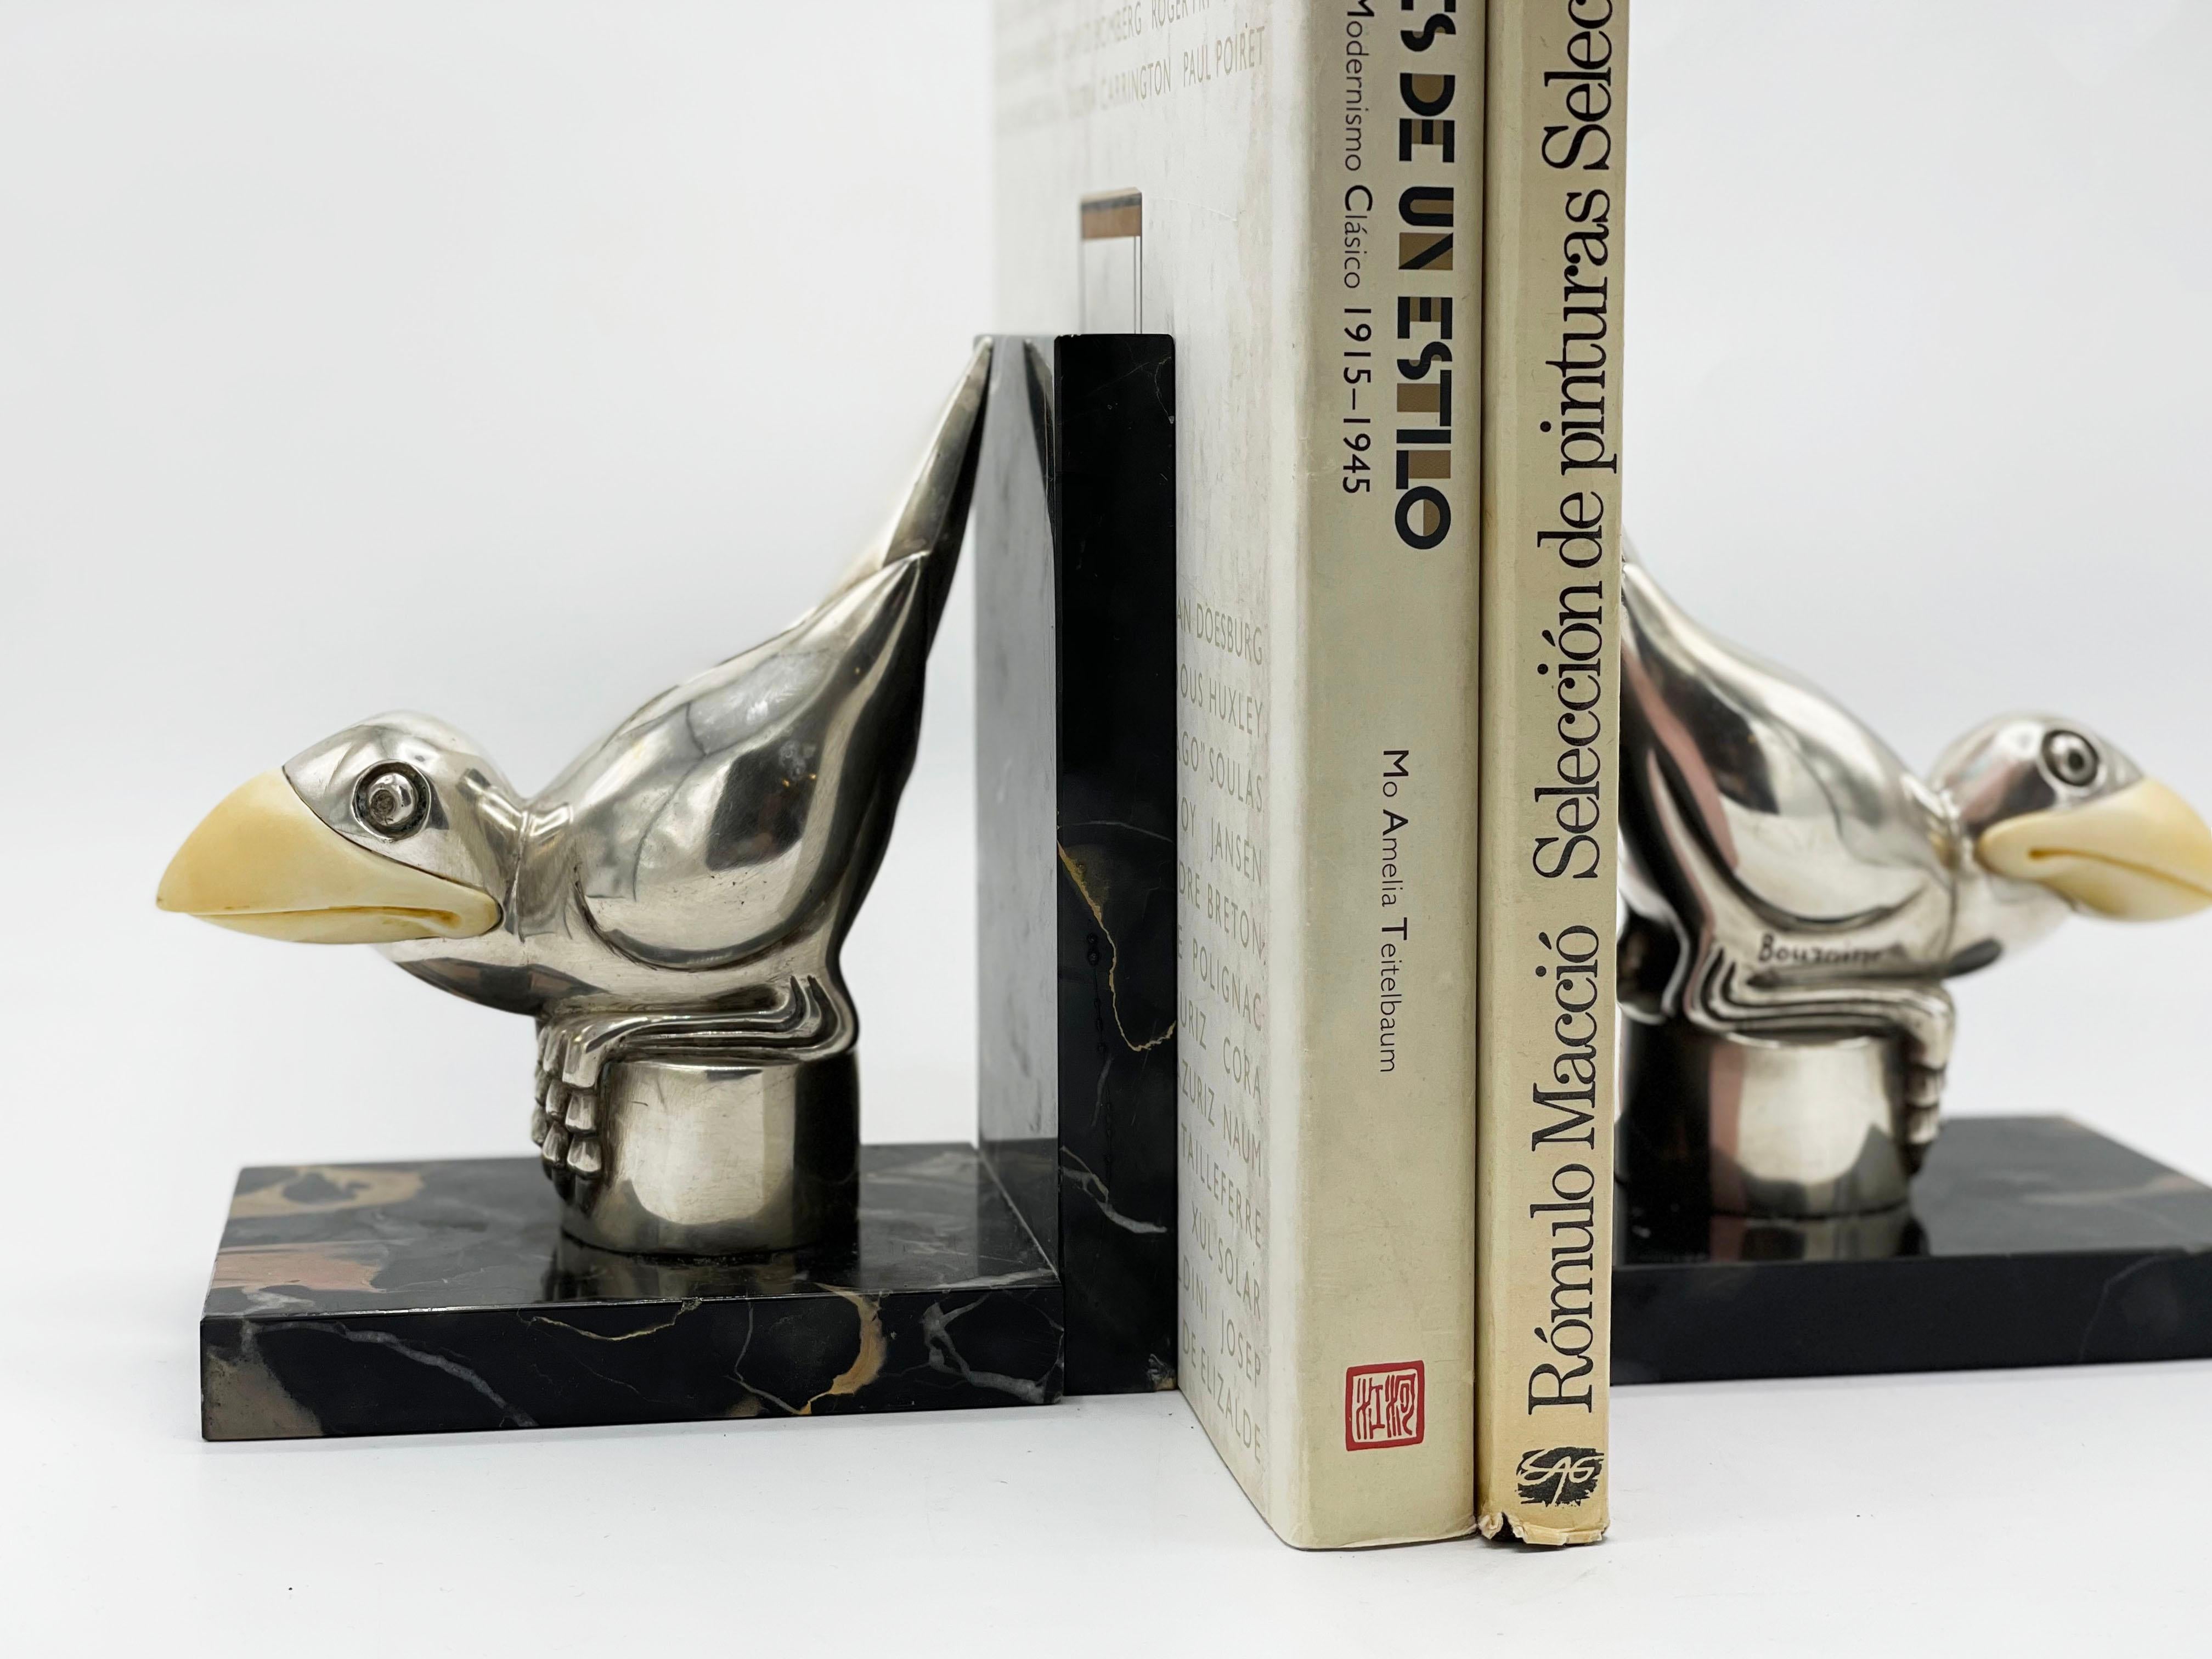 Marcel Bouraine Art Deco Bronze Bird Bookends 1930s
These Art Deco bookends by Marcel Bouraine are playful pieces made of silvered bronze and mounted on Portoro marble. This charming Bird figure was also produced as a fancy automobile “mascot”, to